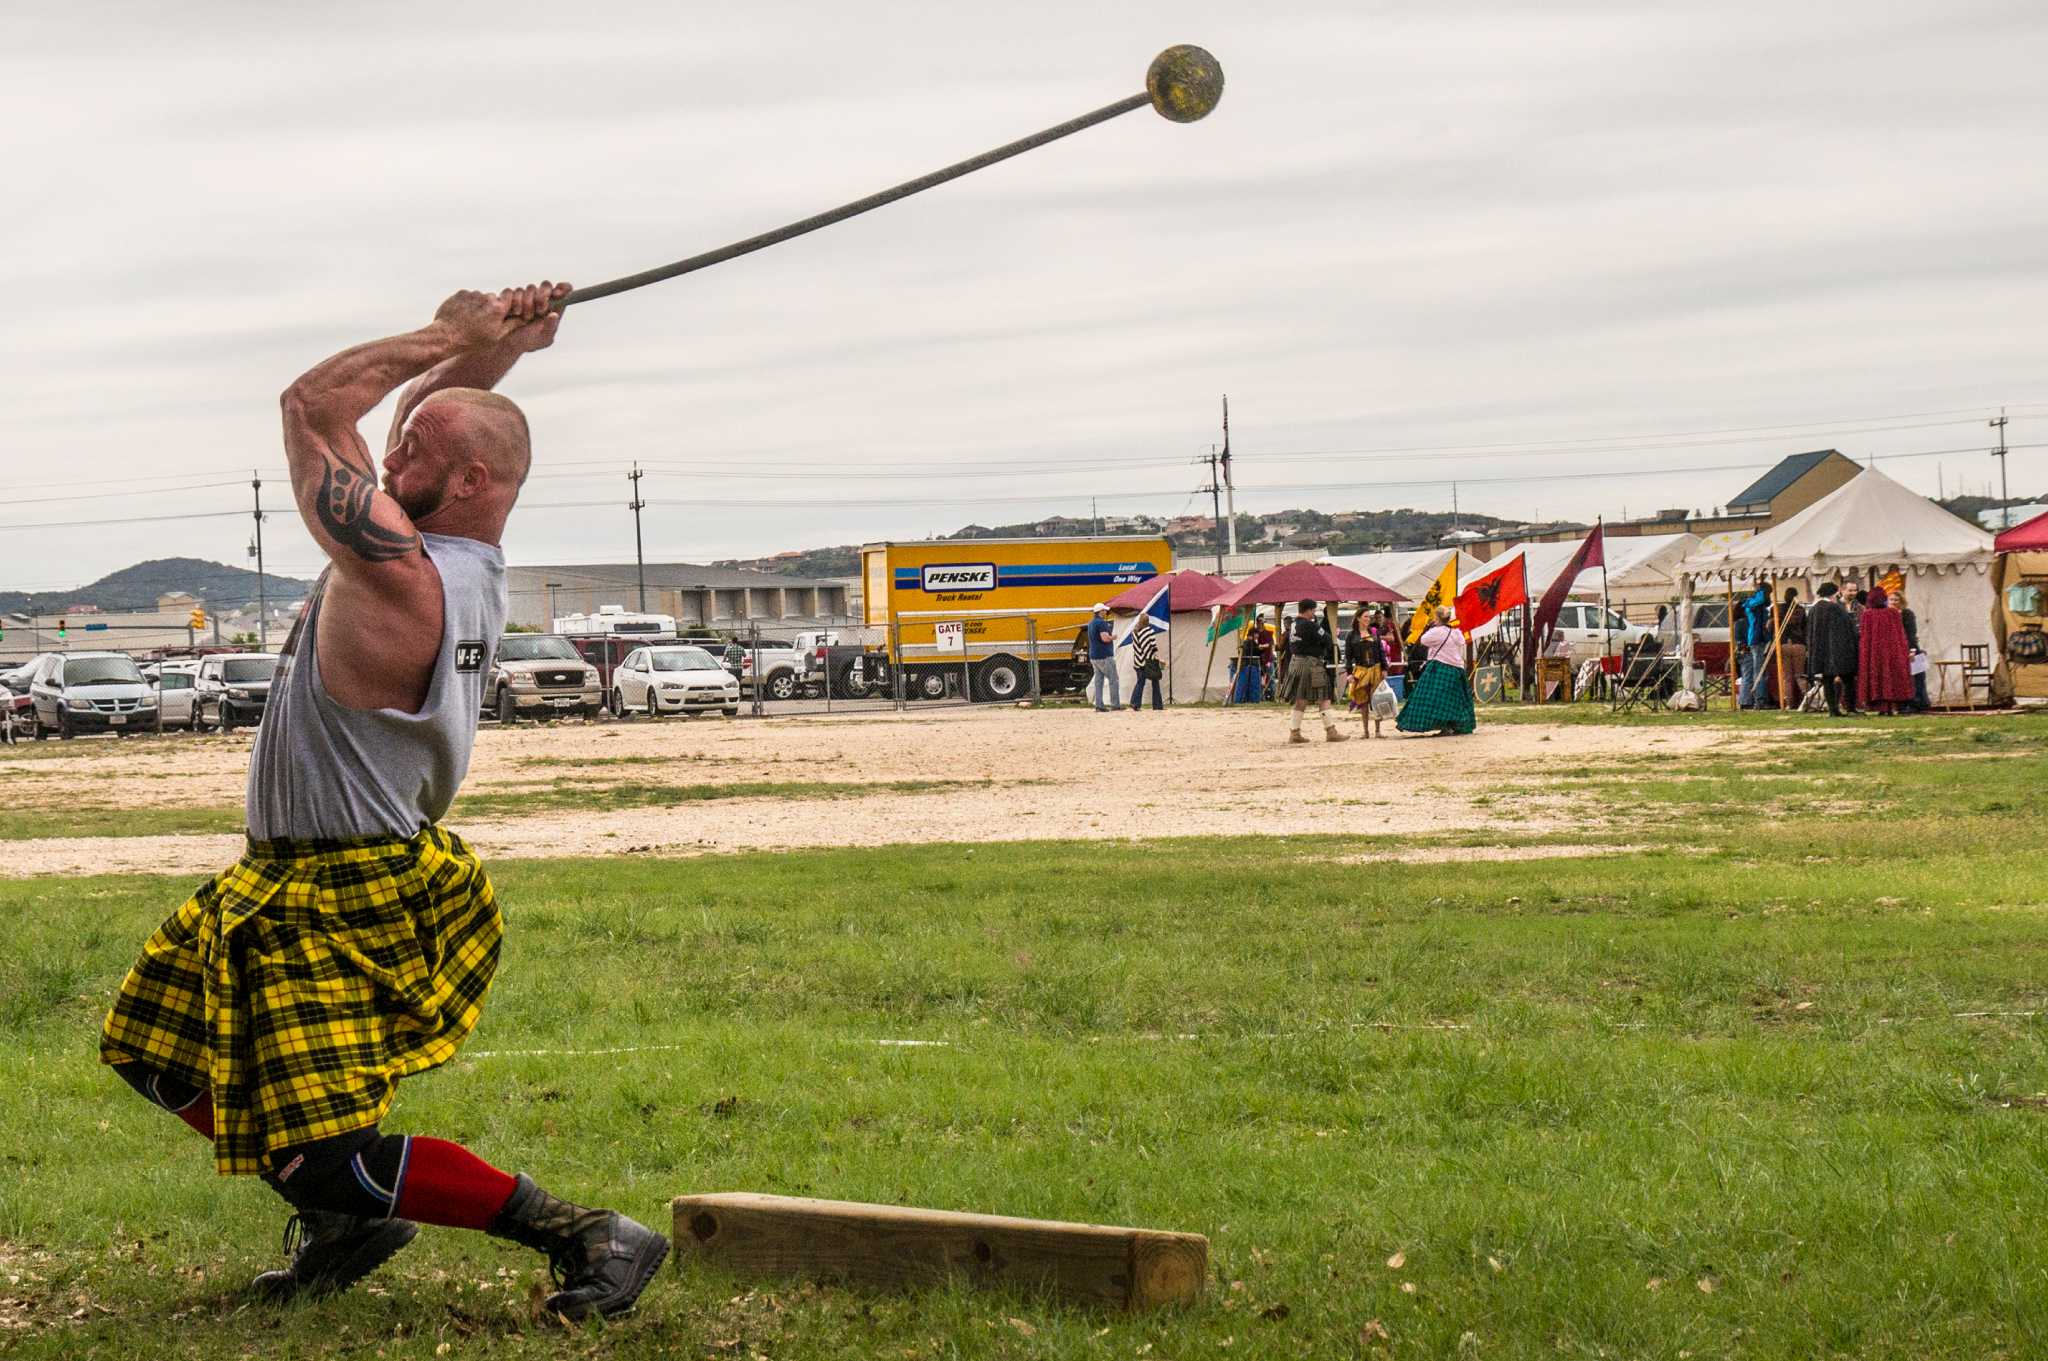 Experience Scottish culture at the San Antonio Highland Games this weekend